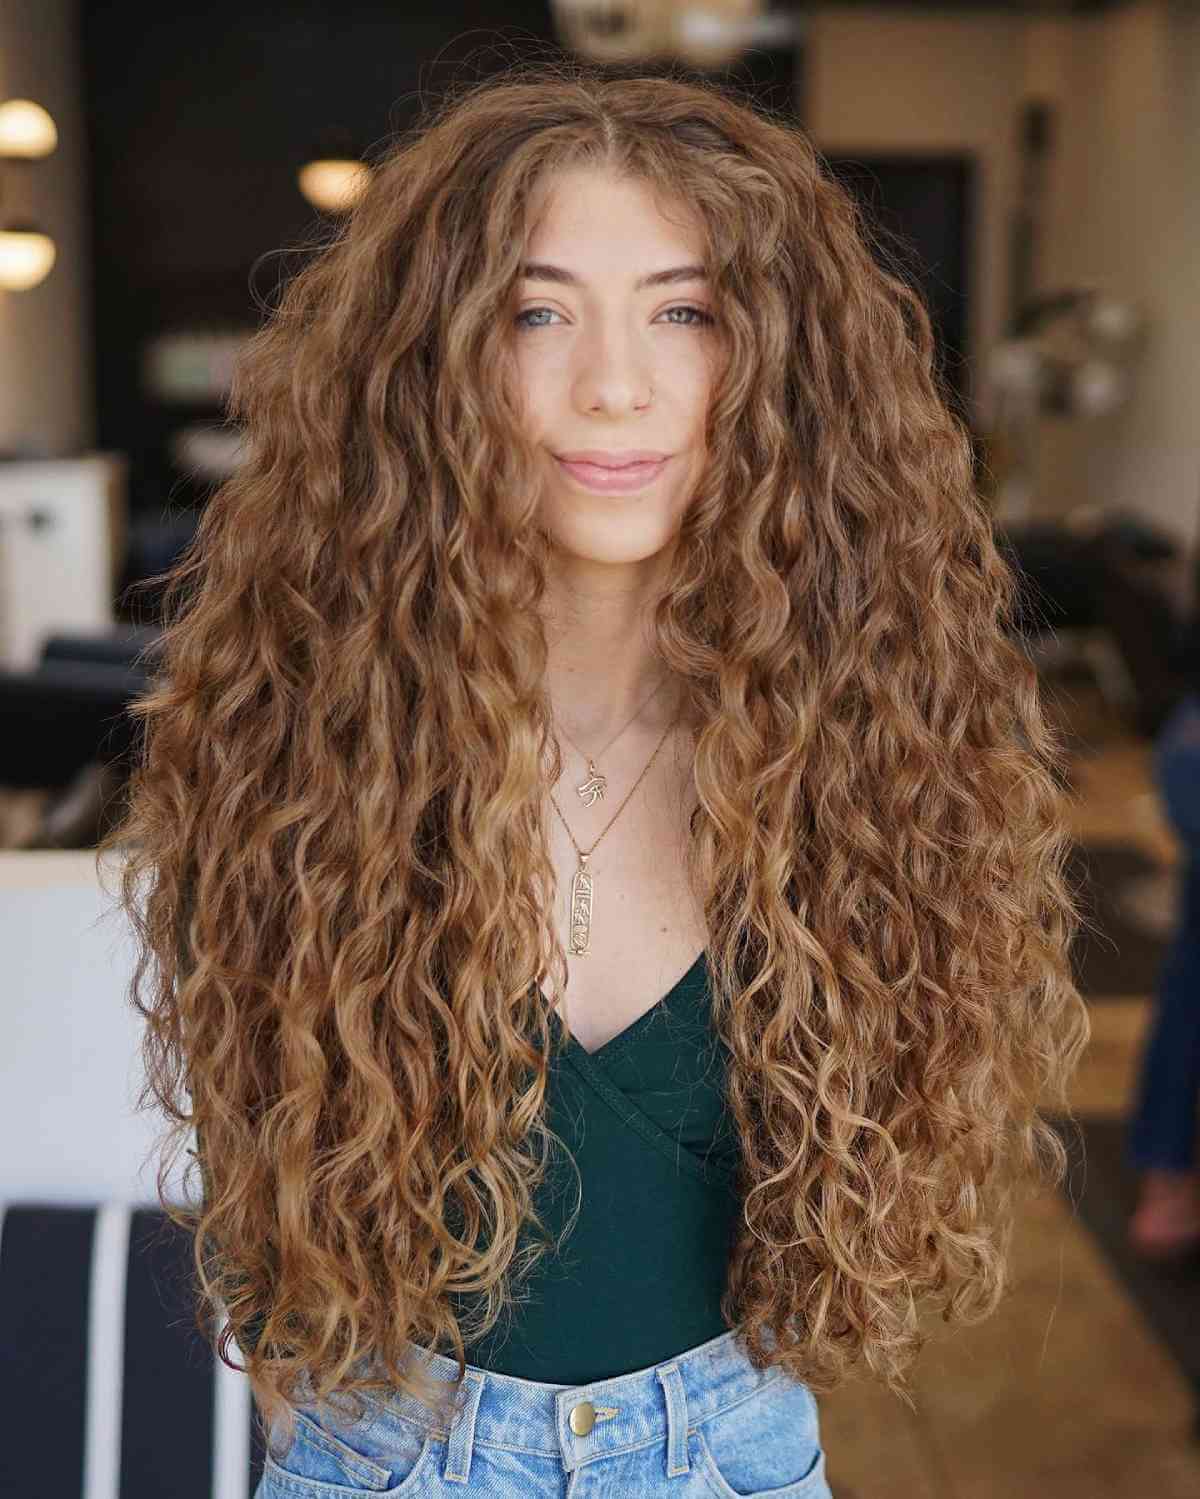 Naturally Curly Hair with Center Part for Long Face Shapes